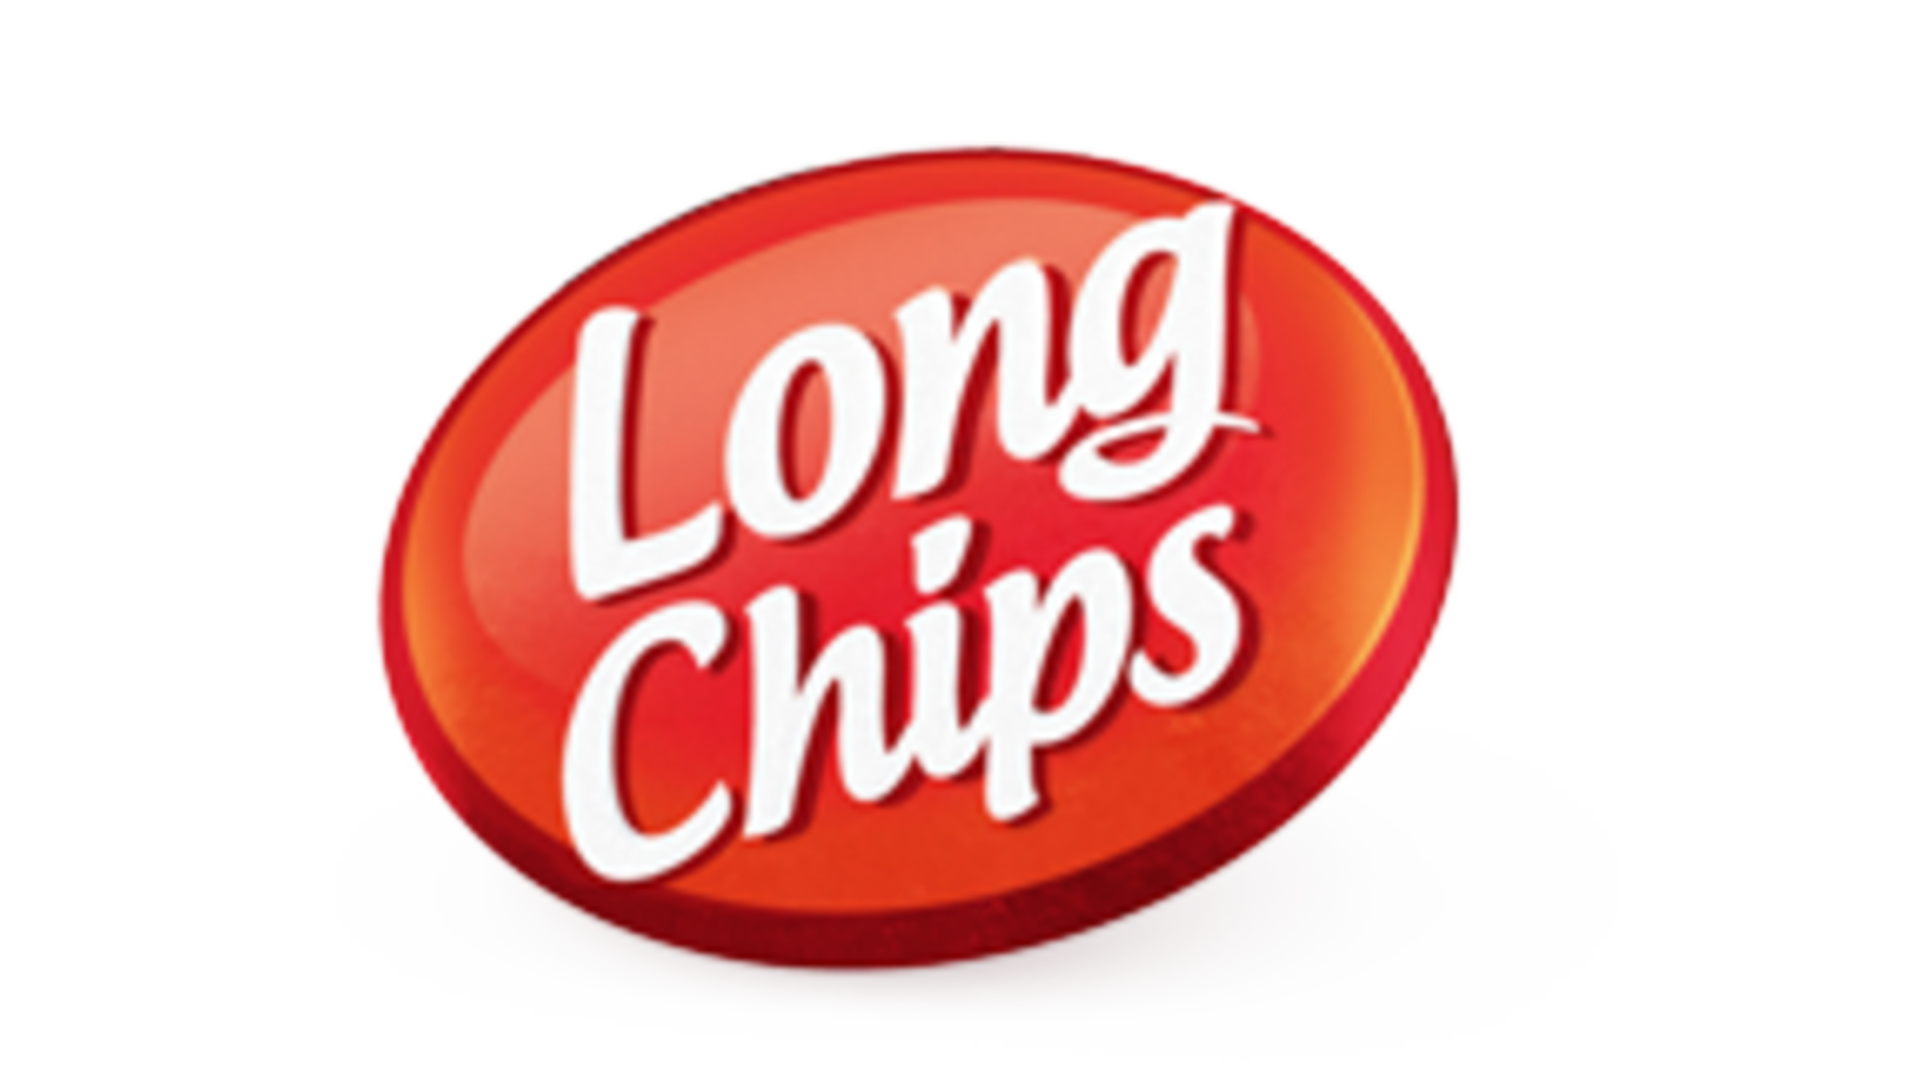 Marque: LONG CHIPS